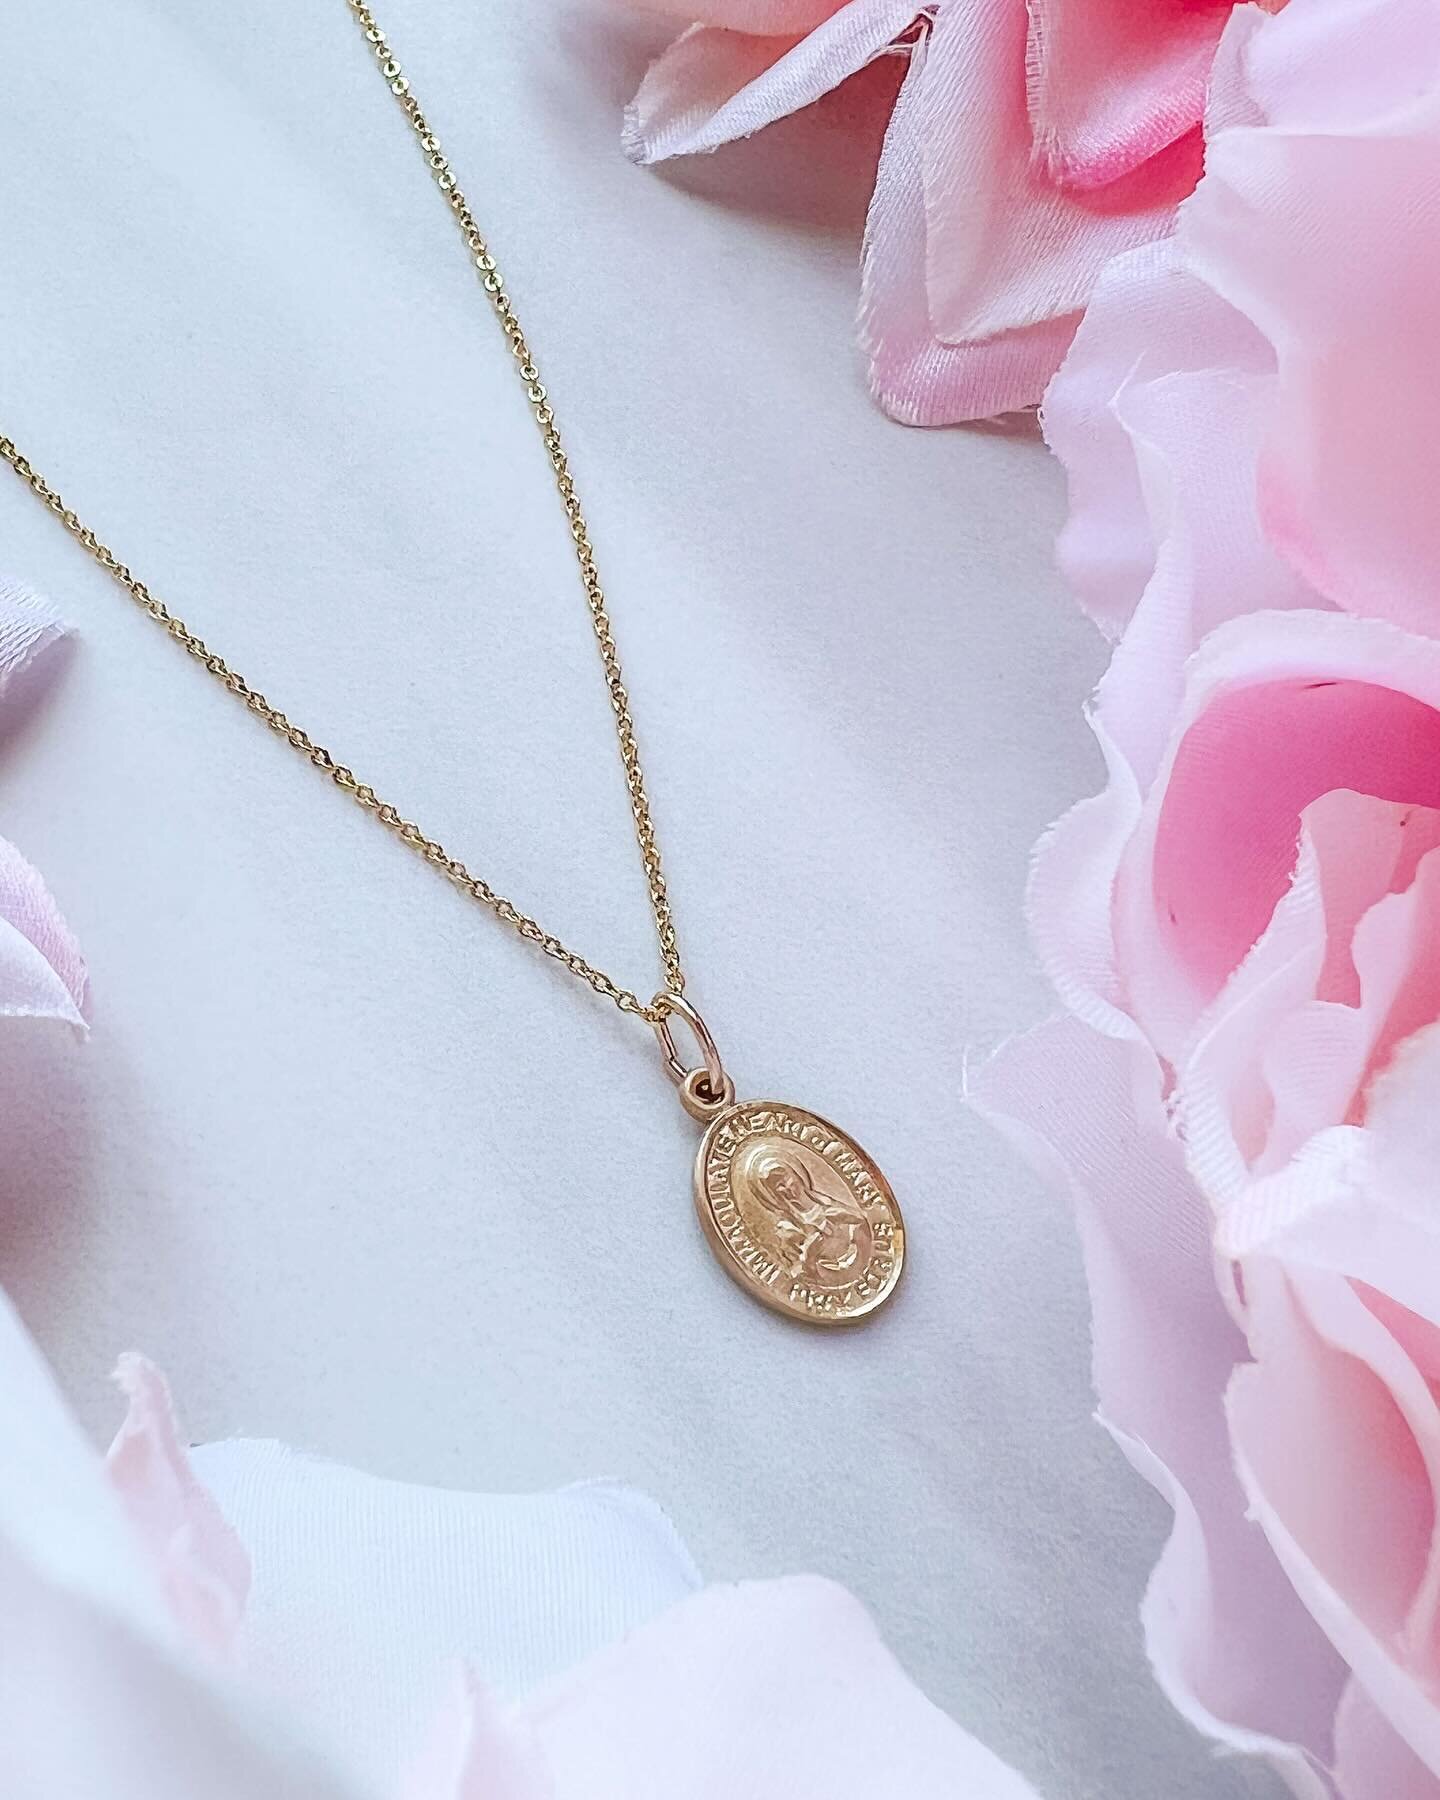 A dainty Immaculate Heart of Mary necklace 💛 this necklace is available with your favorite Saint or Marian image, Sacred Heart of Jesus, and more. You can find it on our Jewelry page at LivolsiRosaries.com. Available in 14k gold, gold filled, and st